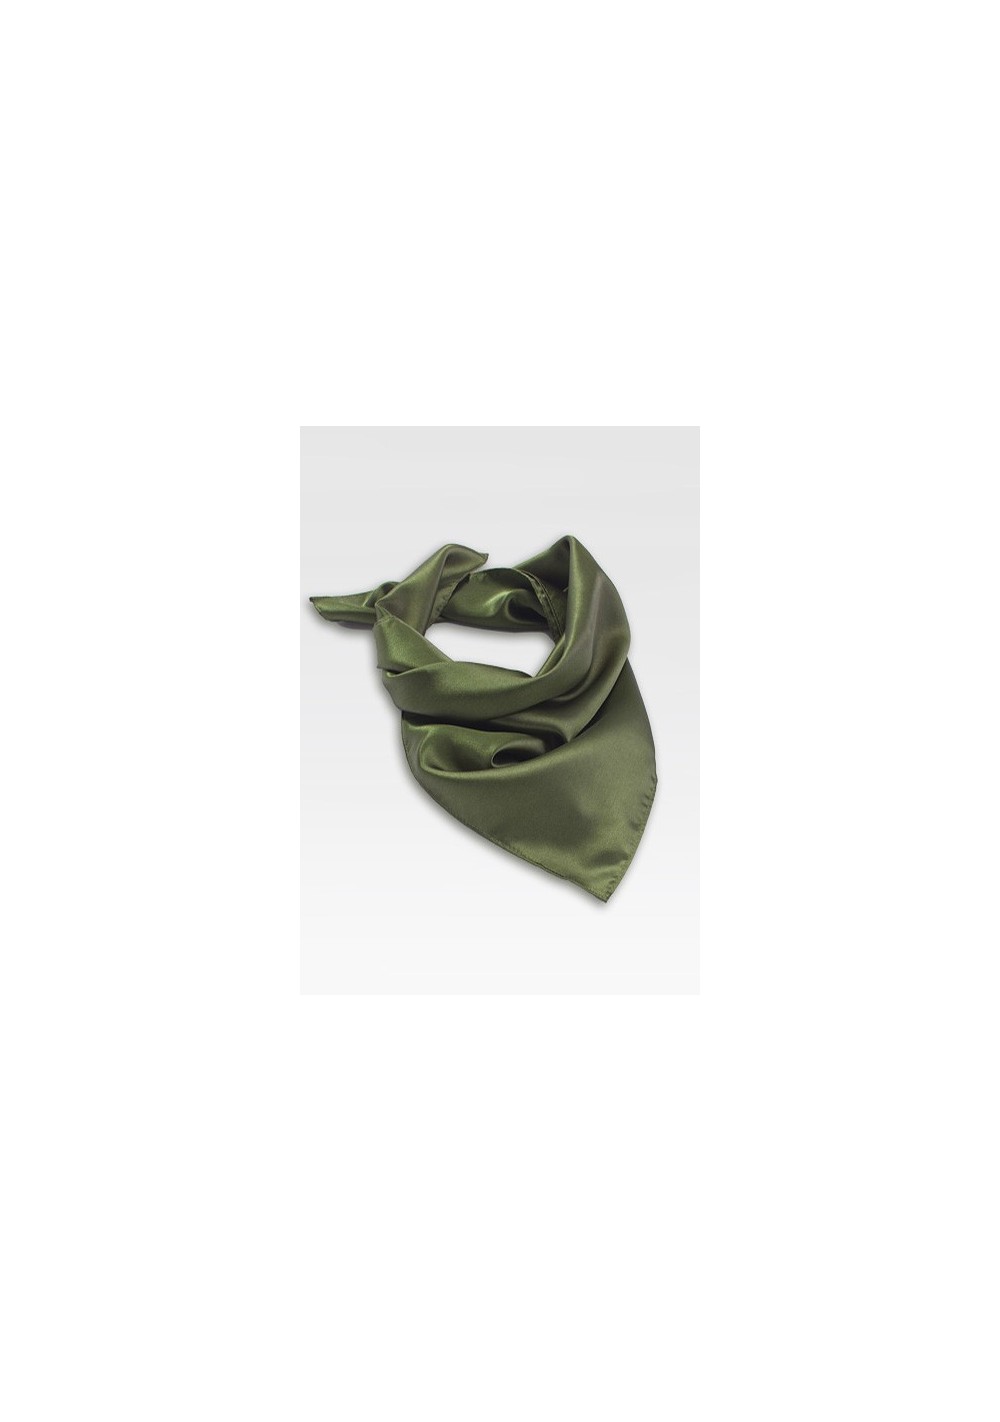 Olive Green Women's Scarf